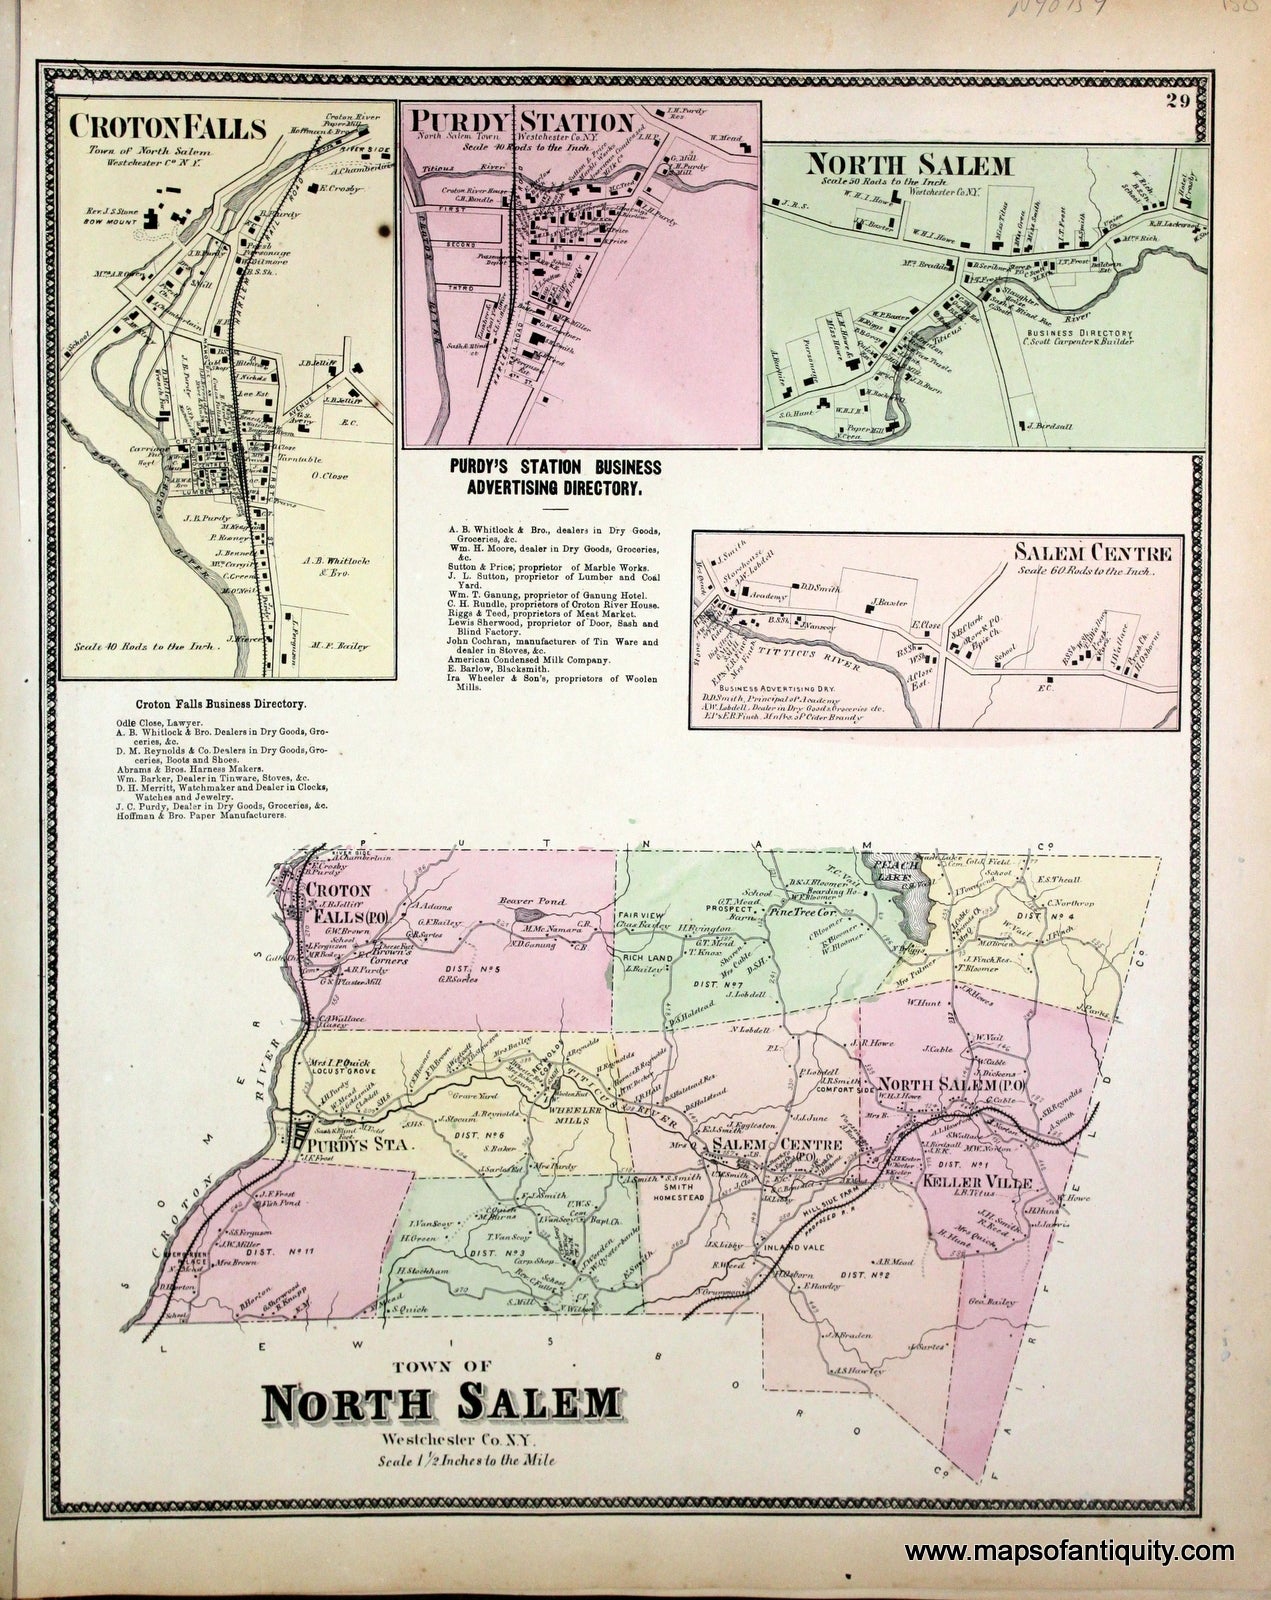 Antique-Hand-Colored-Map-Town-of-North-Salem-Westchester-Co.-N.Y.-(with-insets-of-Croton-Falls-Purdy-Station-North-Salem-and-Salem-Center).-United-States-Northeast-1867-Beers-Maps-Of-Antiquity